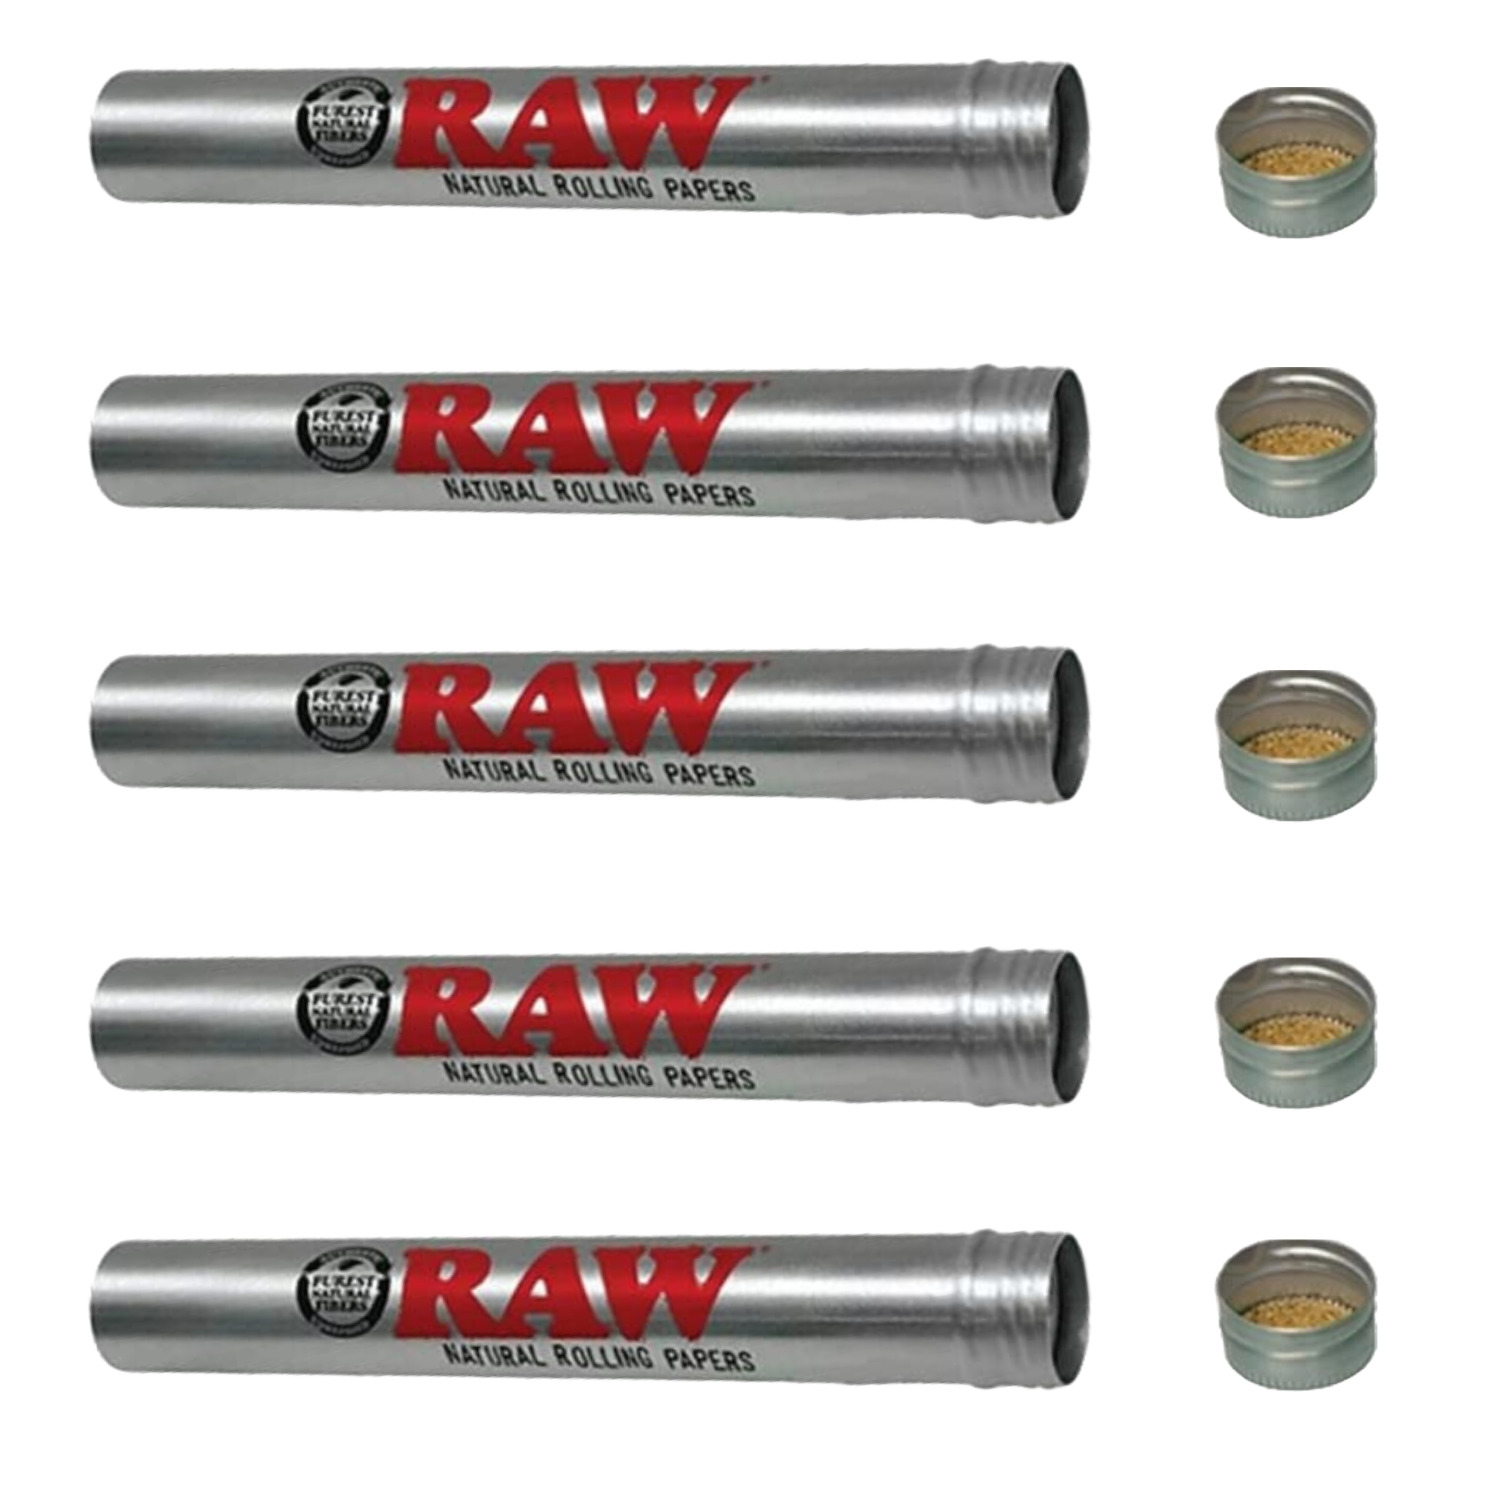 RAW Silver King Size Aluminum Air Tight Storage Tube with Screw Cap (5 Pack)